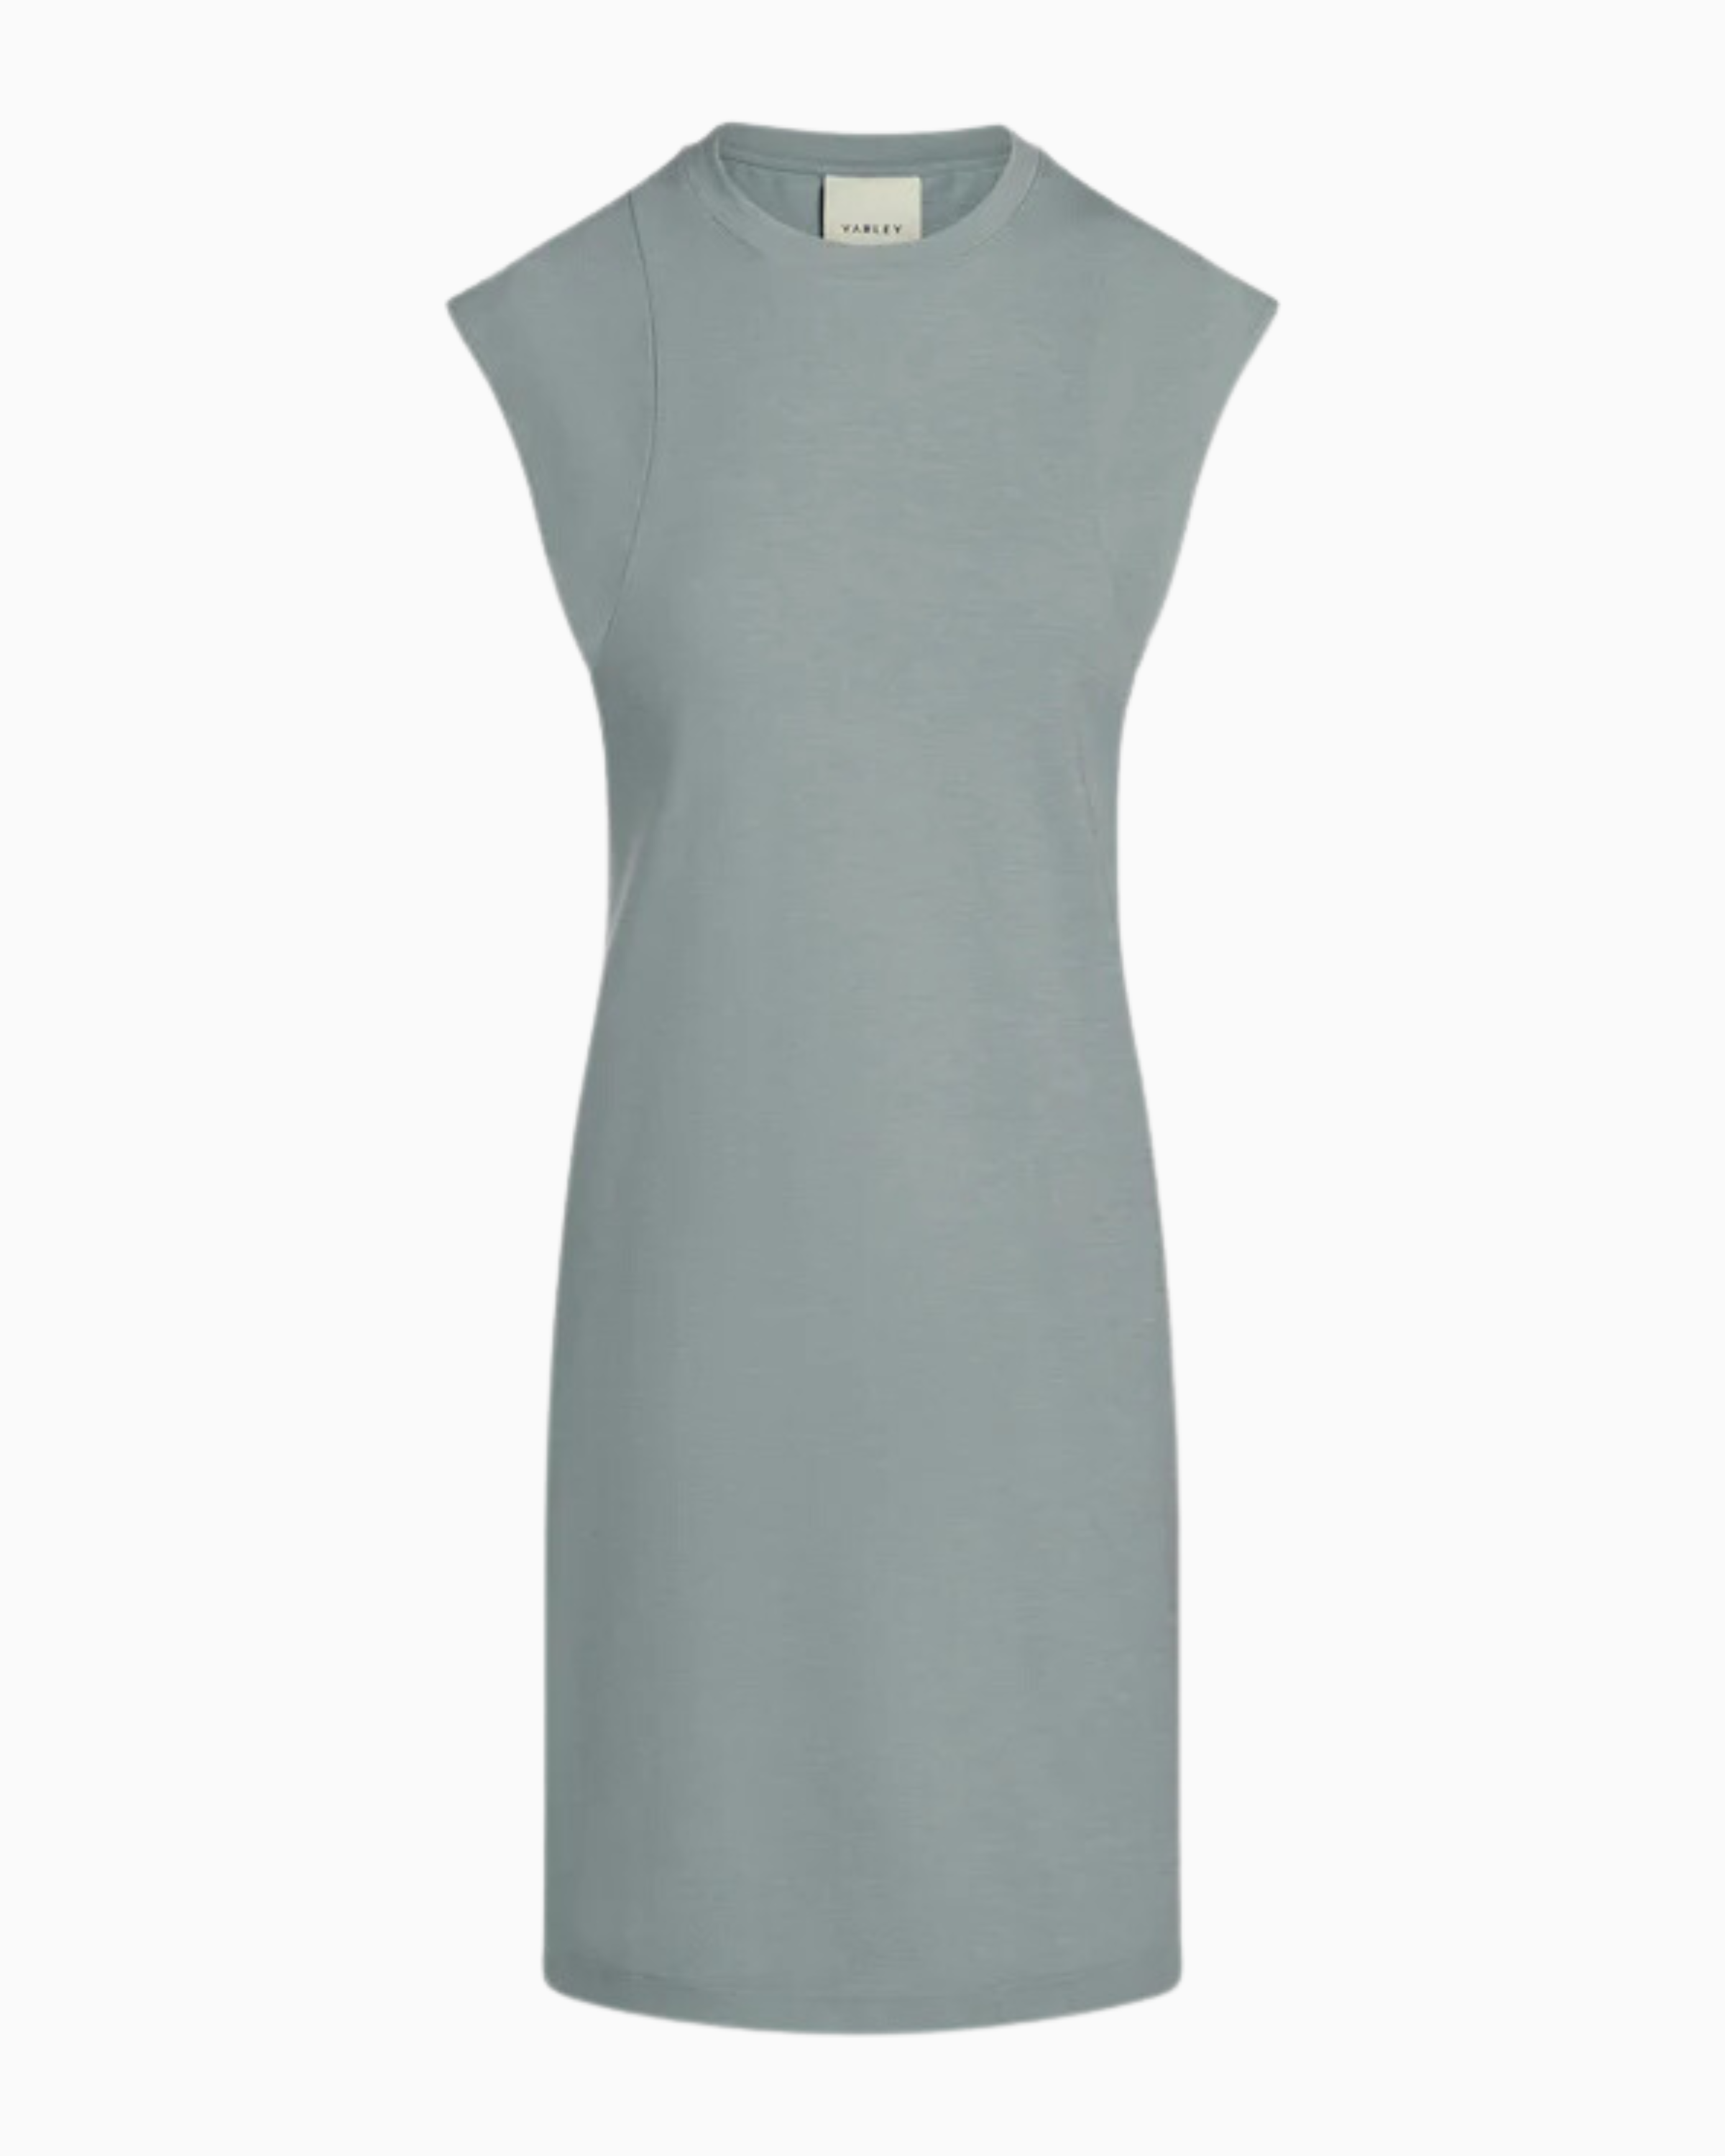 Varley Naples Dress in Mineral Green